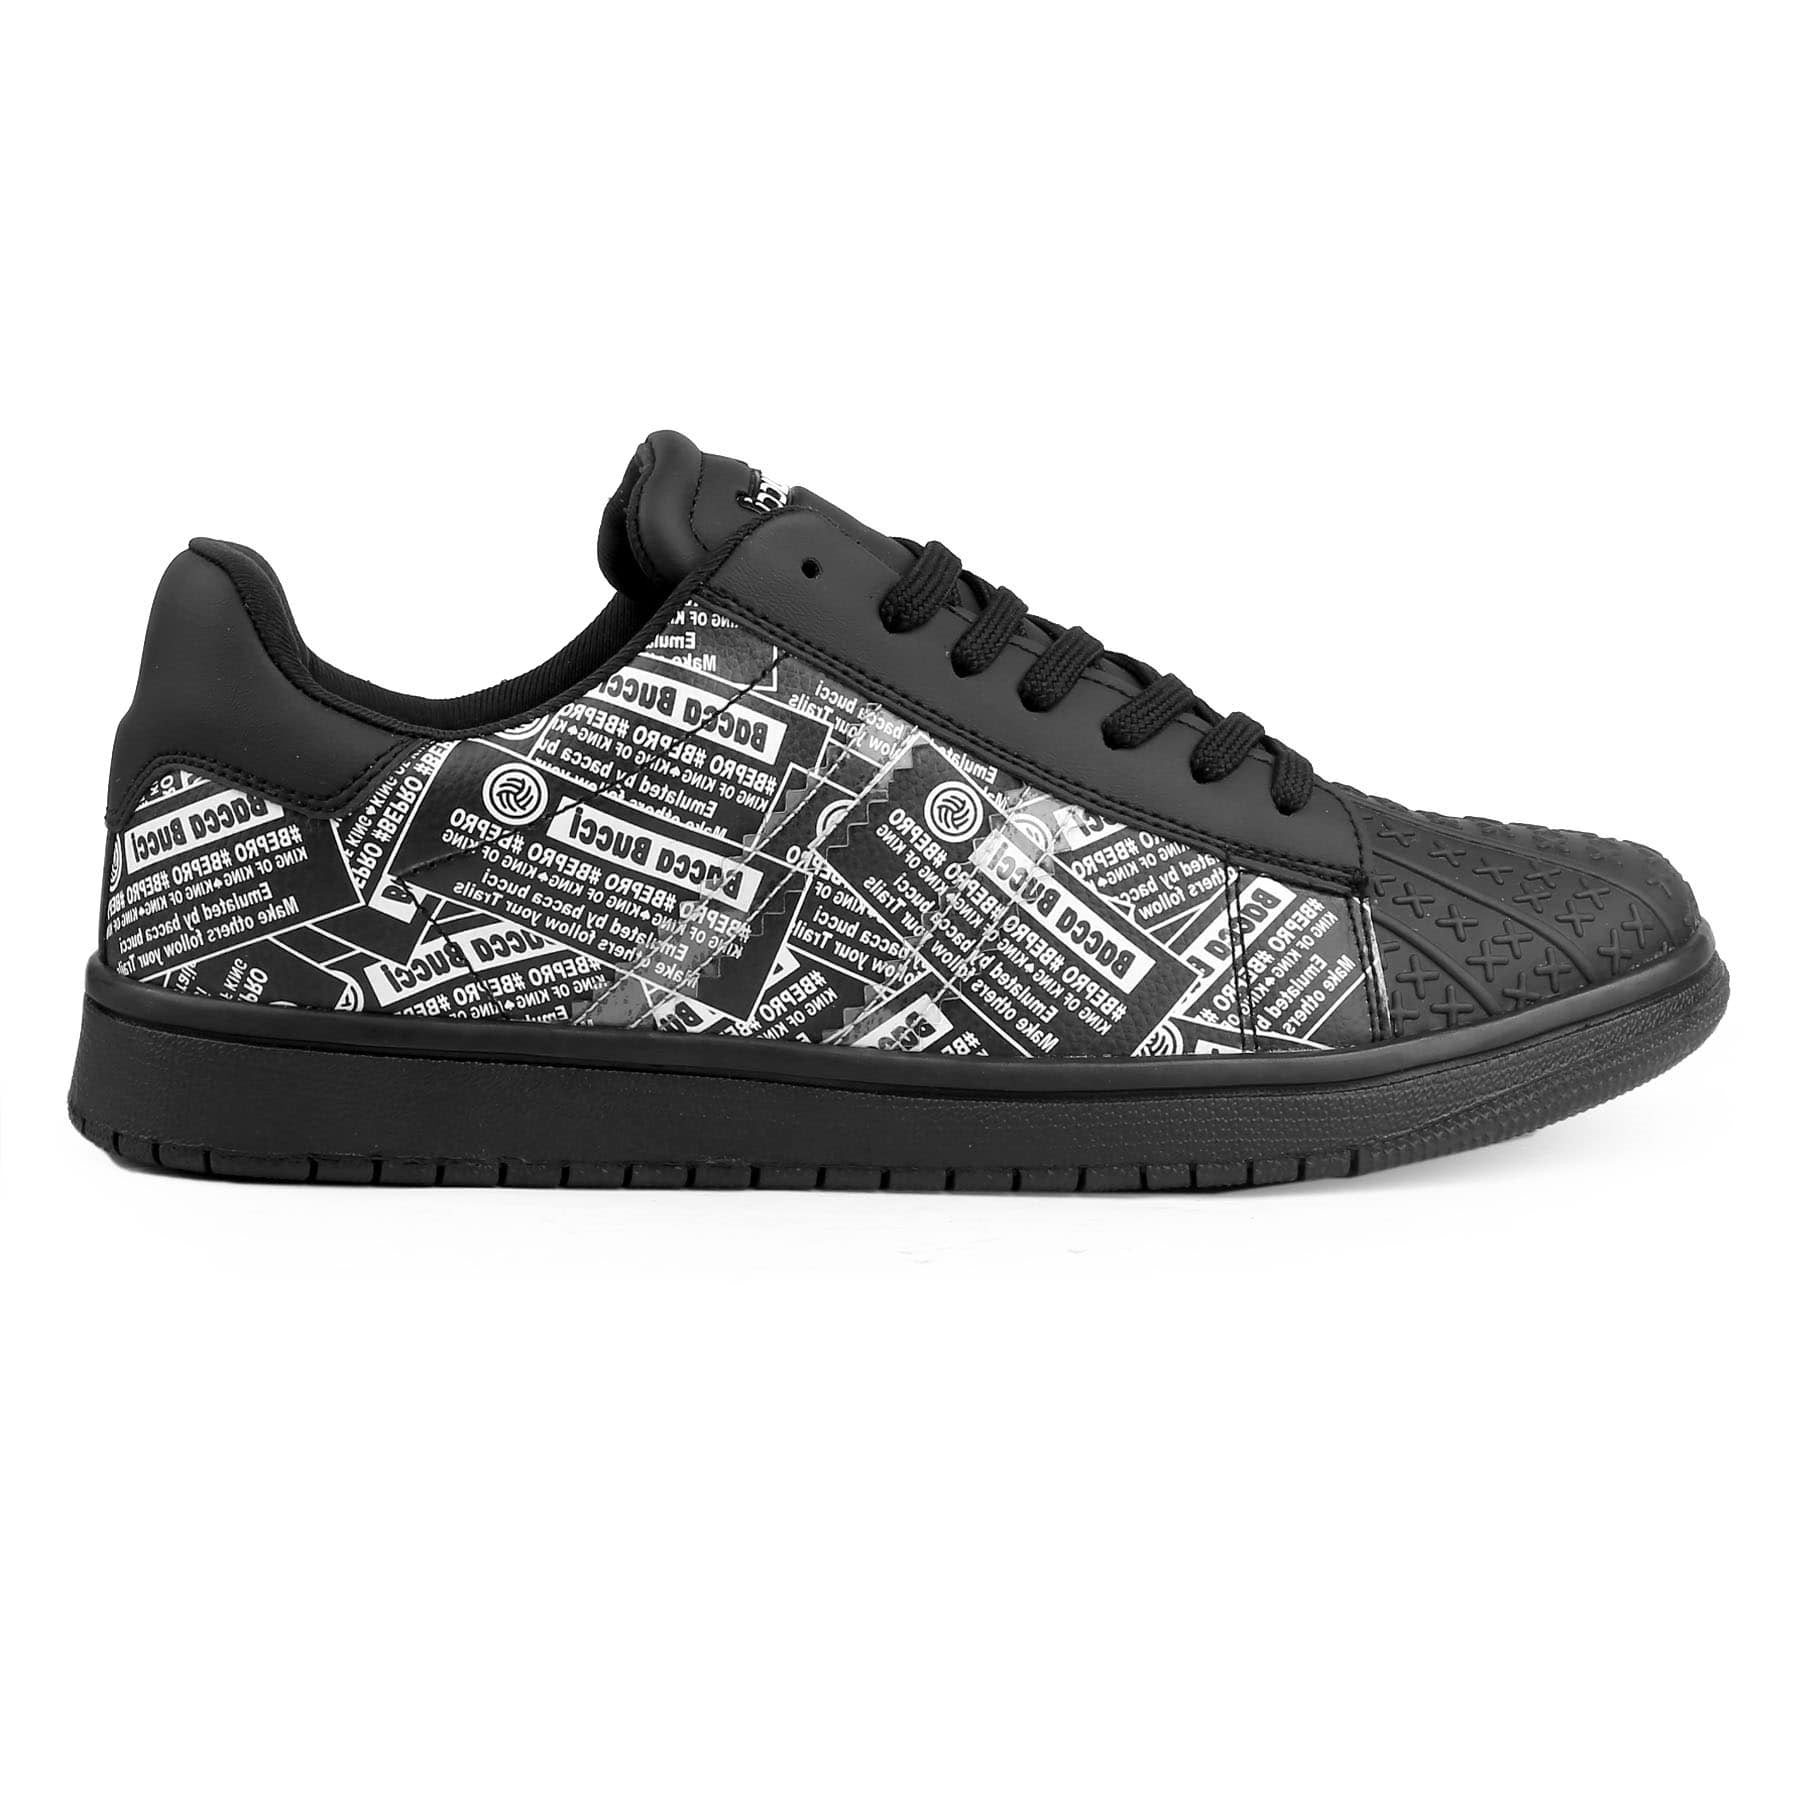 Bacca Bucci RAVEN Low-Top Sneakers/Casual Shoes with Memory Cushion Footbed